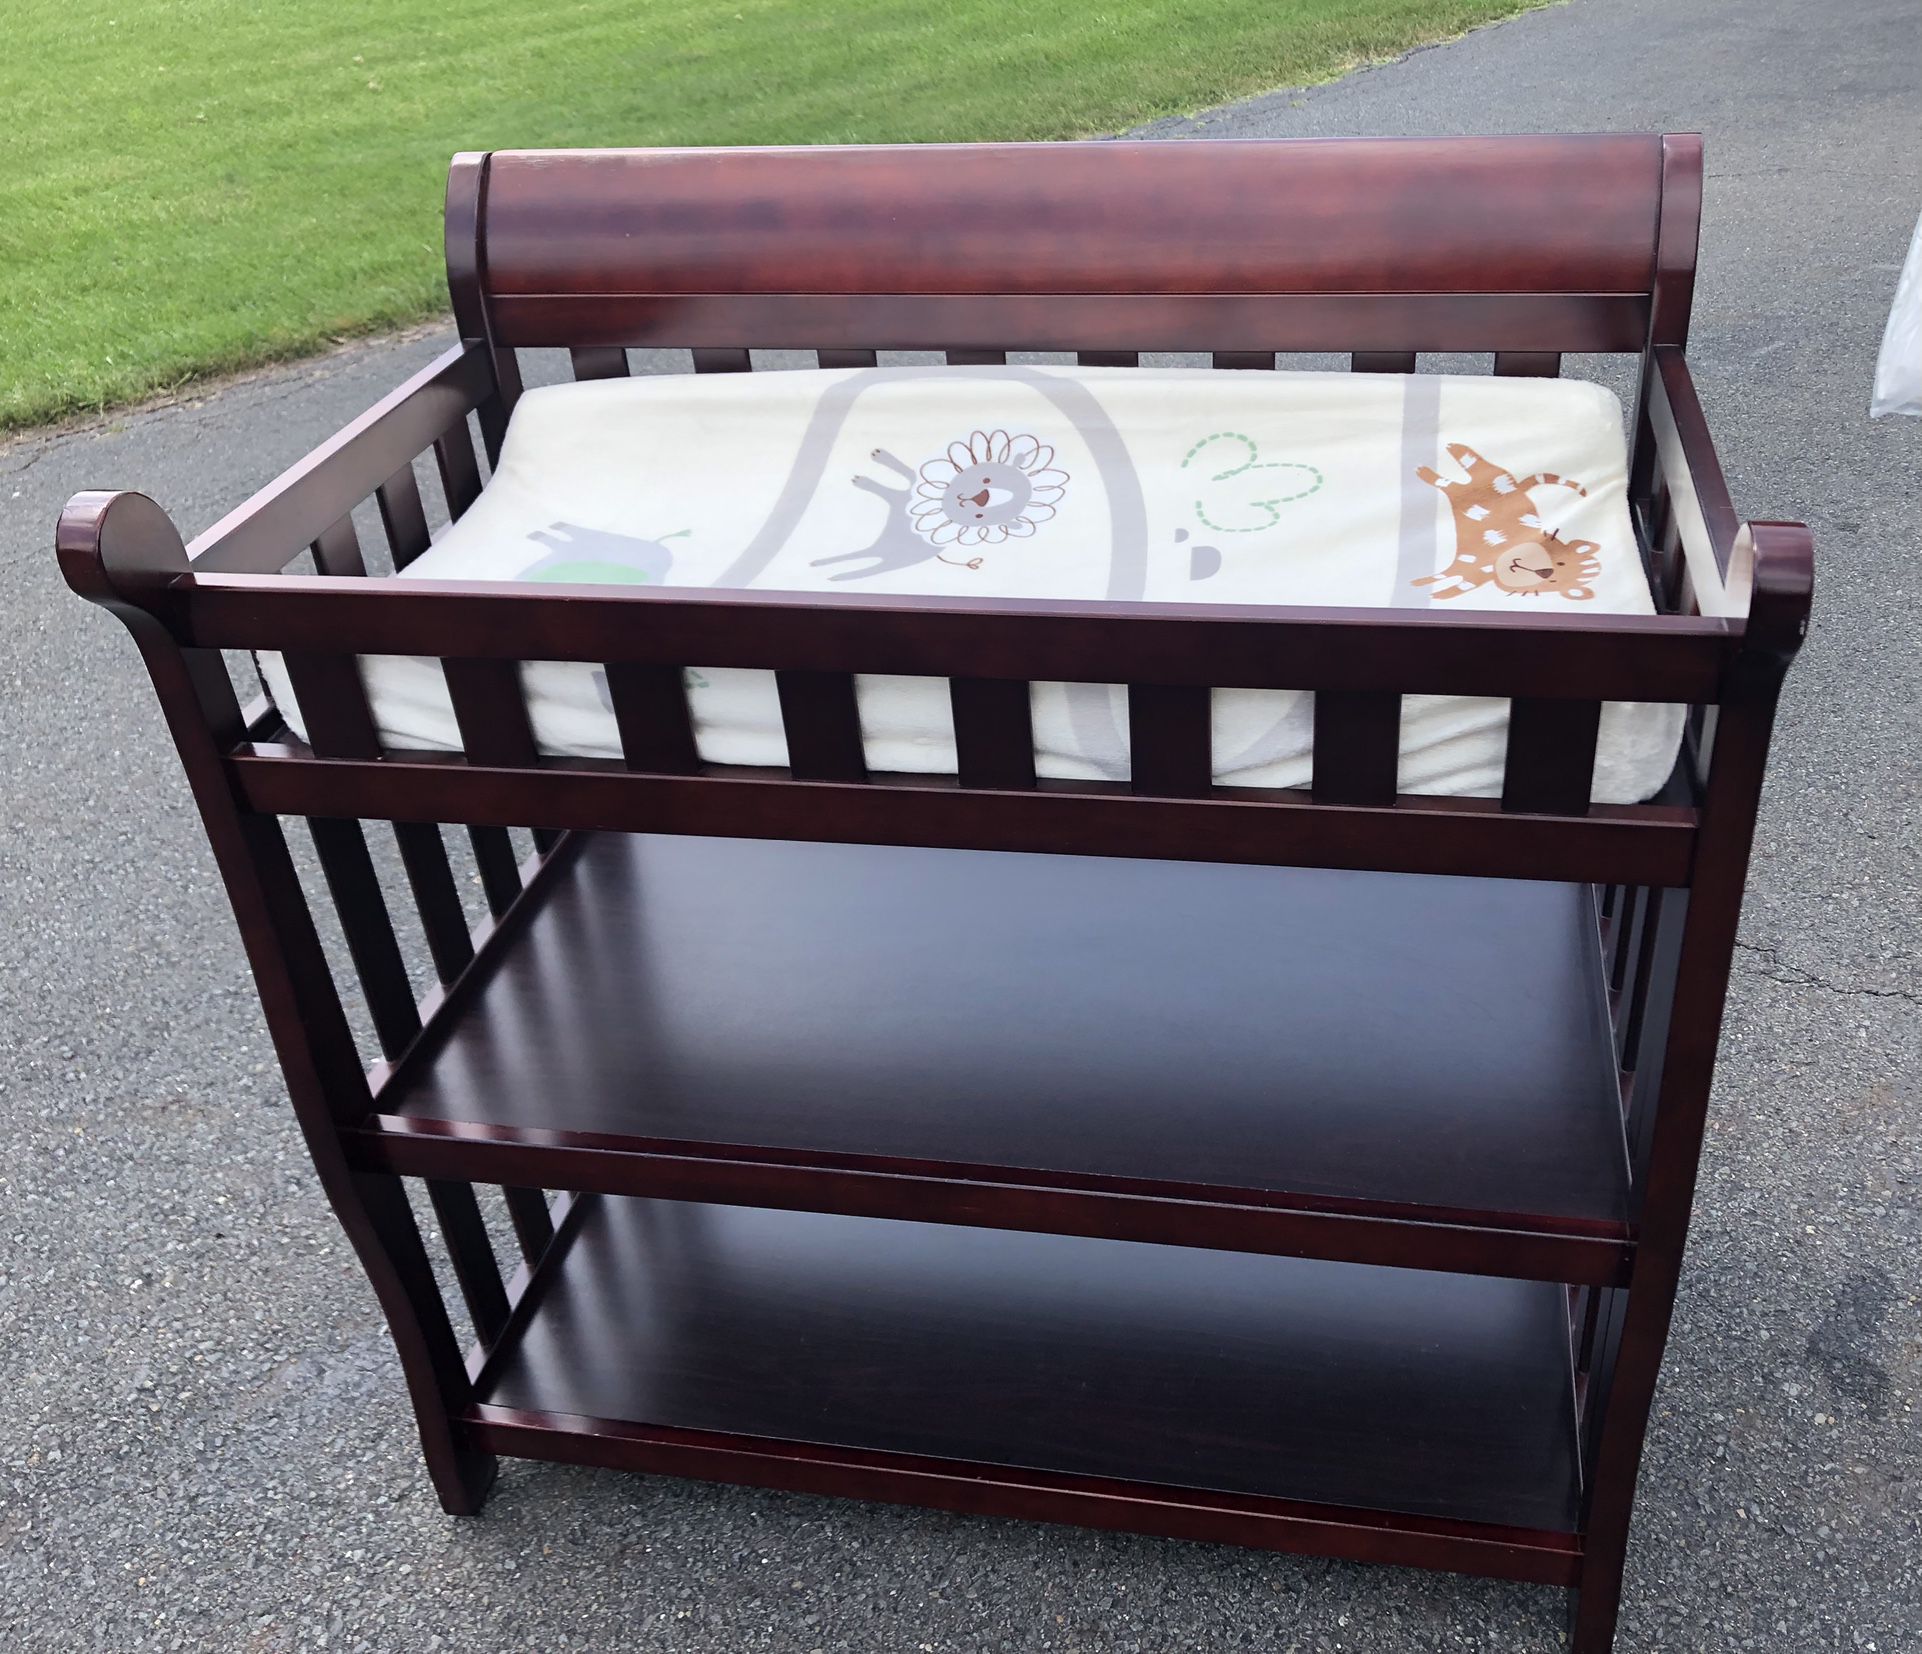 PRICE REDUCED!!!Changing table